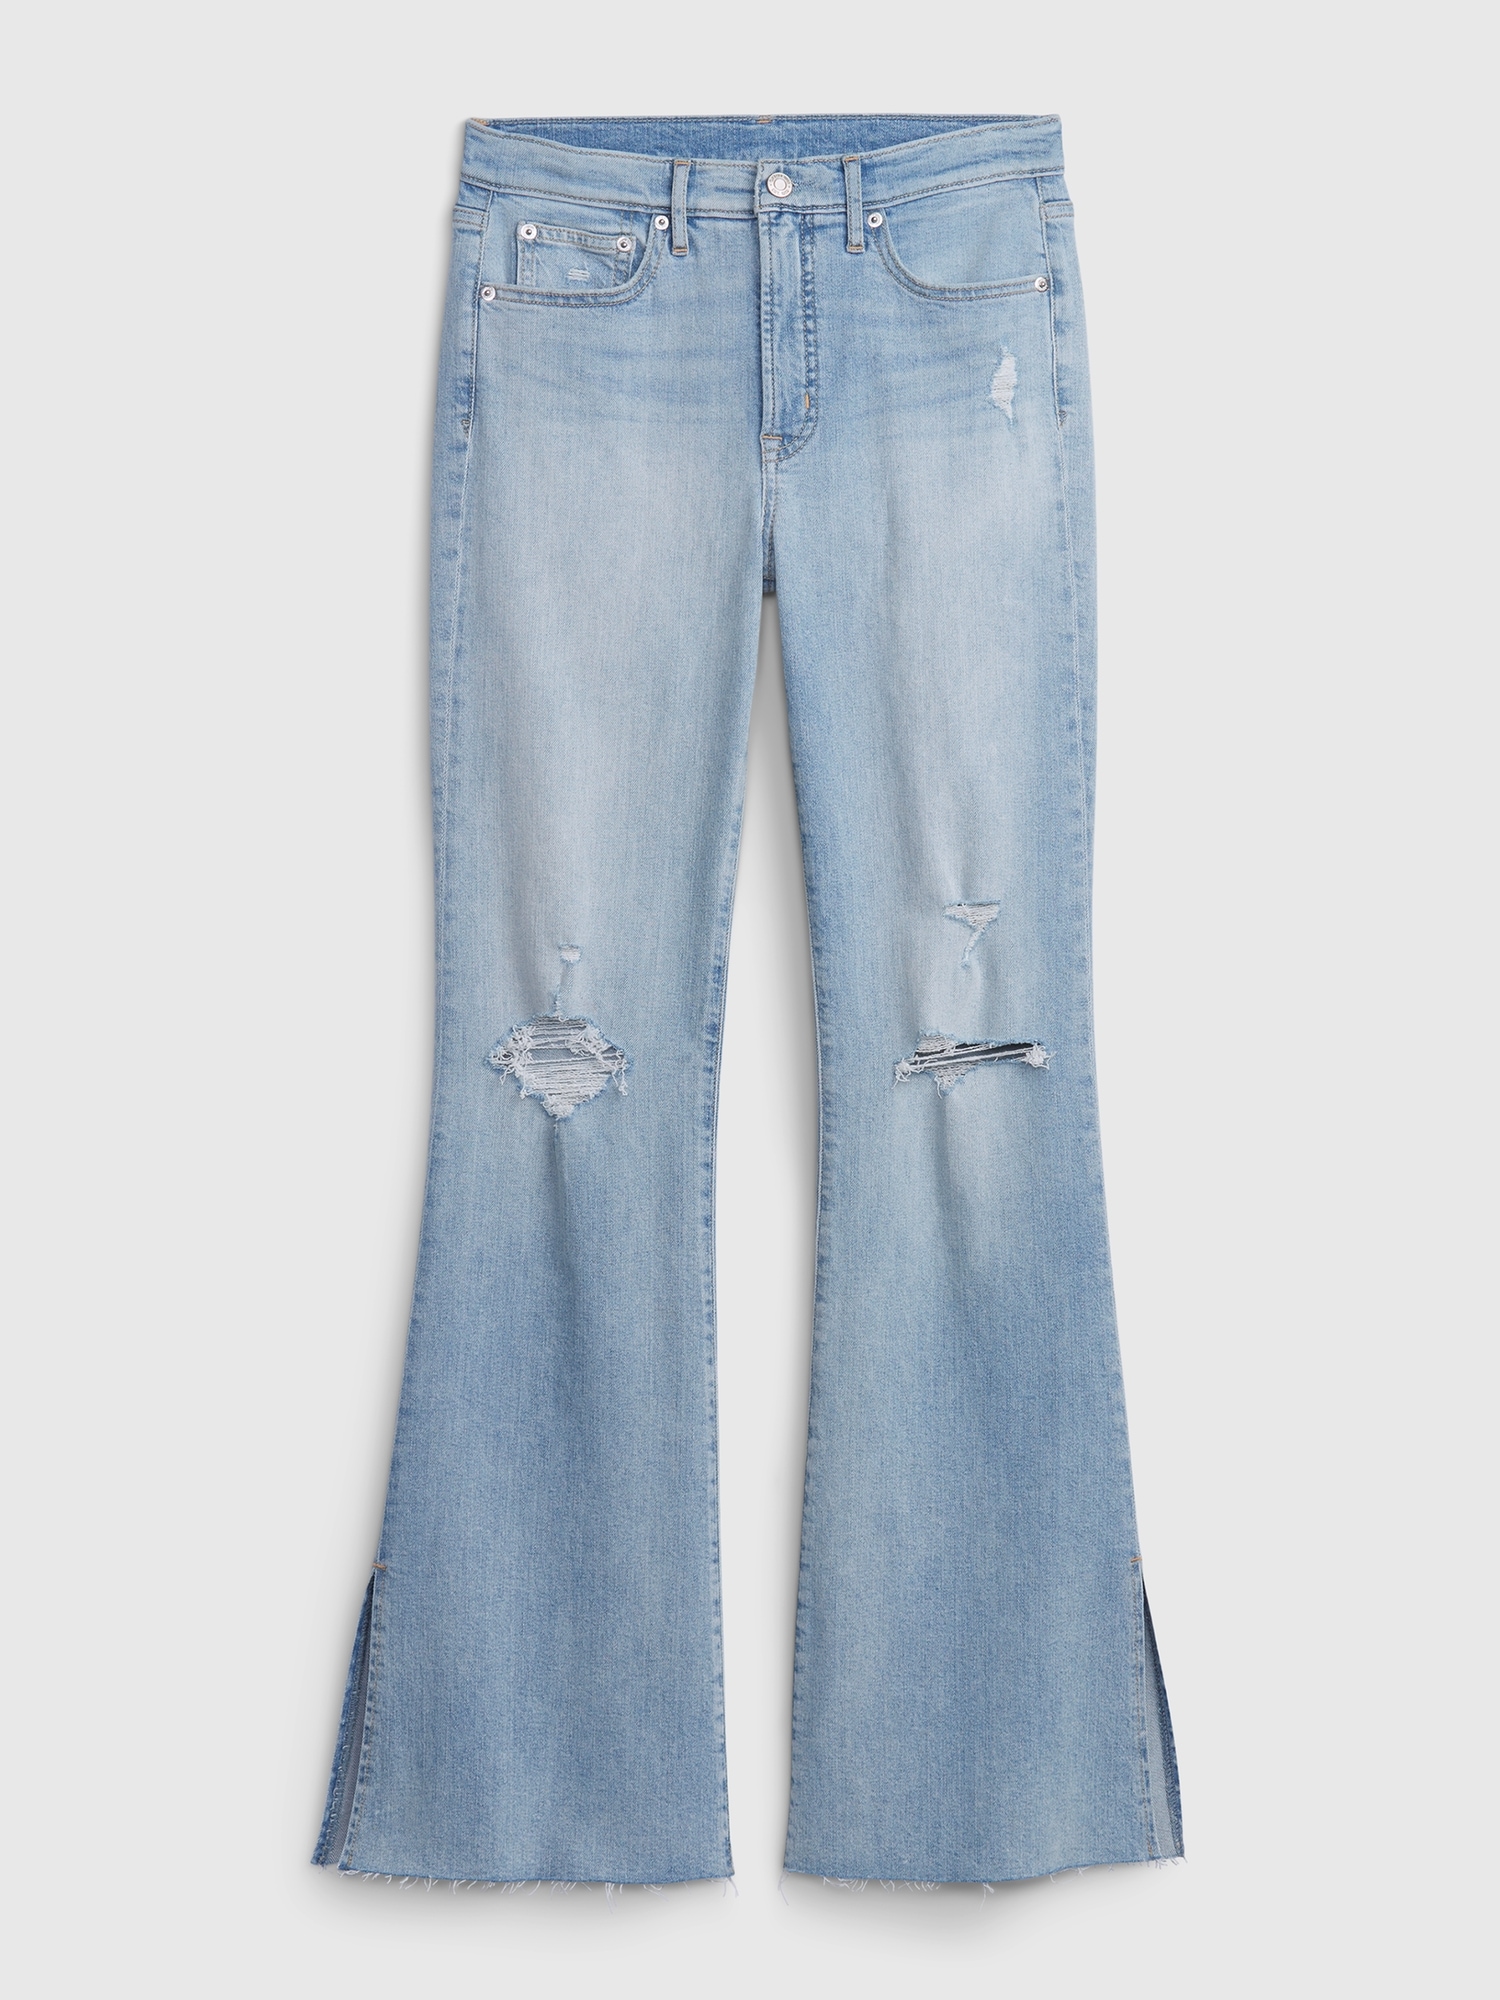 Flaring up: how jeans got baggy again - The Face